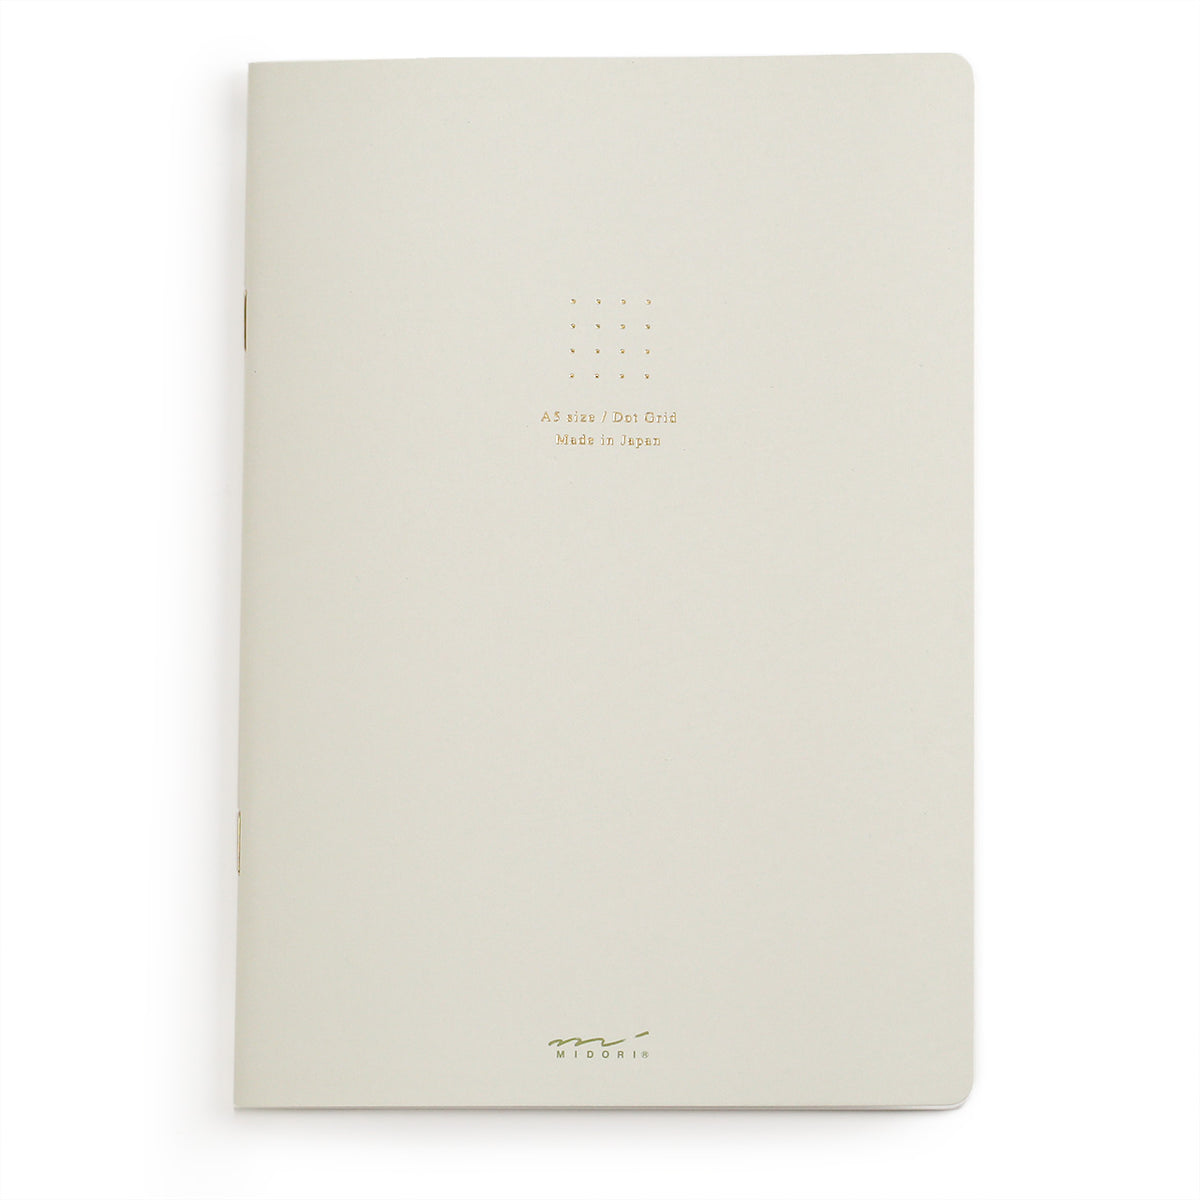 White (actually a VERY light greyish tone) dot grid A5 notebook from midori with gold coloured foil stamping on the cover and gold coloured staples